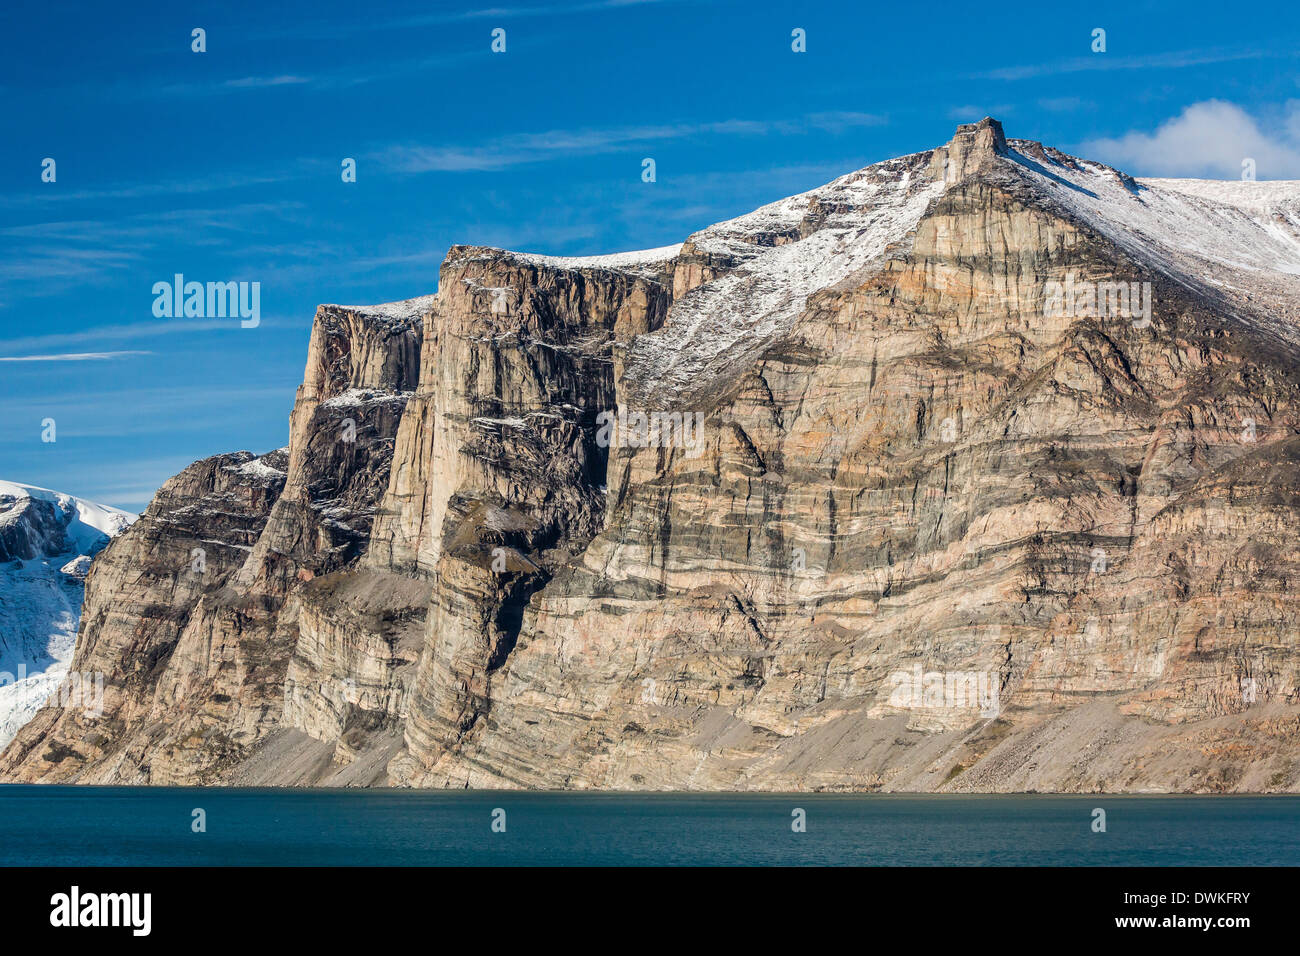 Snow-capped mountains and steep cliffs of Icy Arm, Baffin Island, Nunavut, Canada, North America Stock Photo